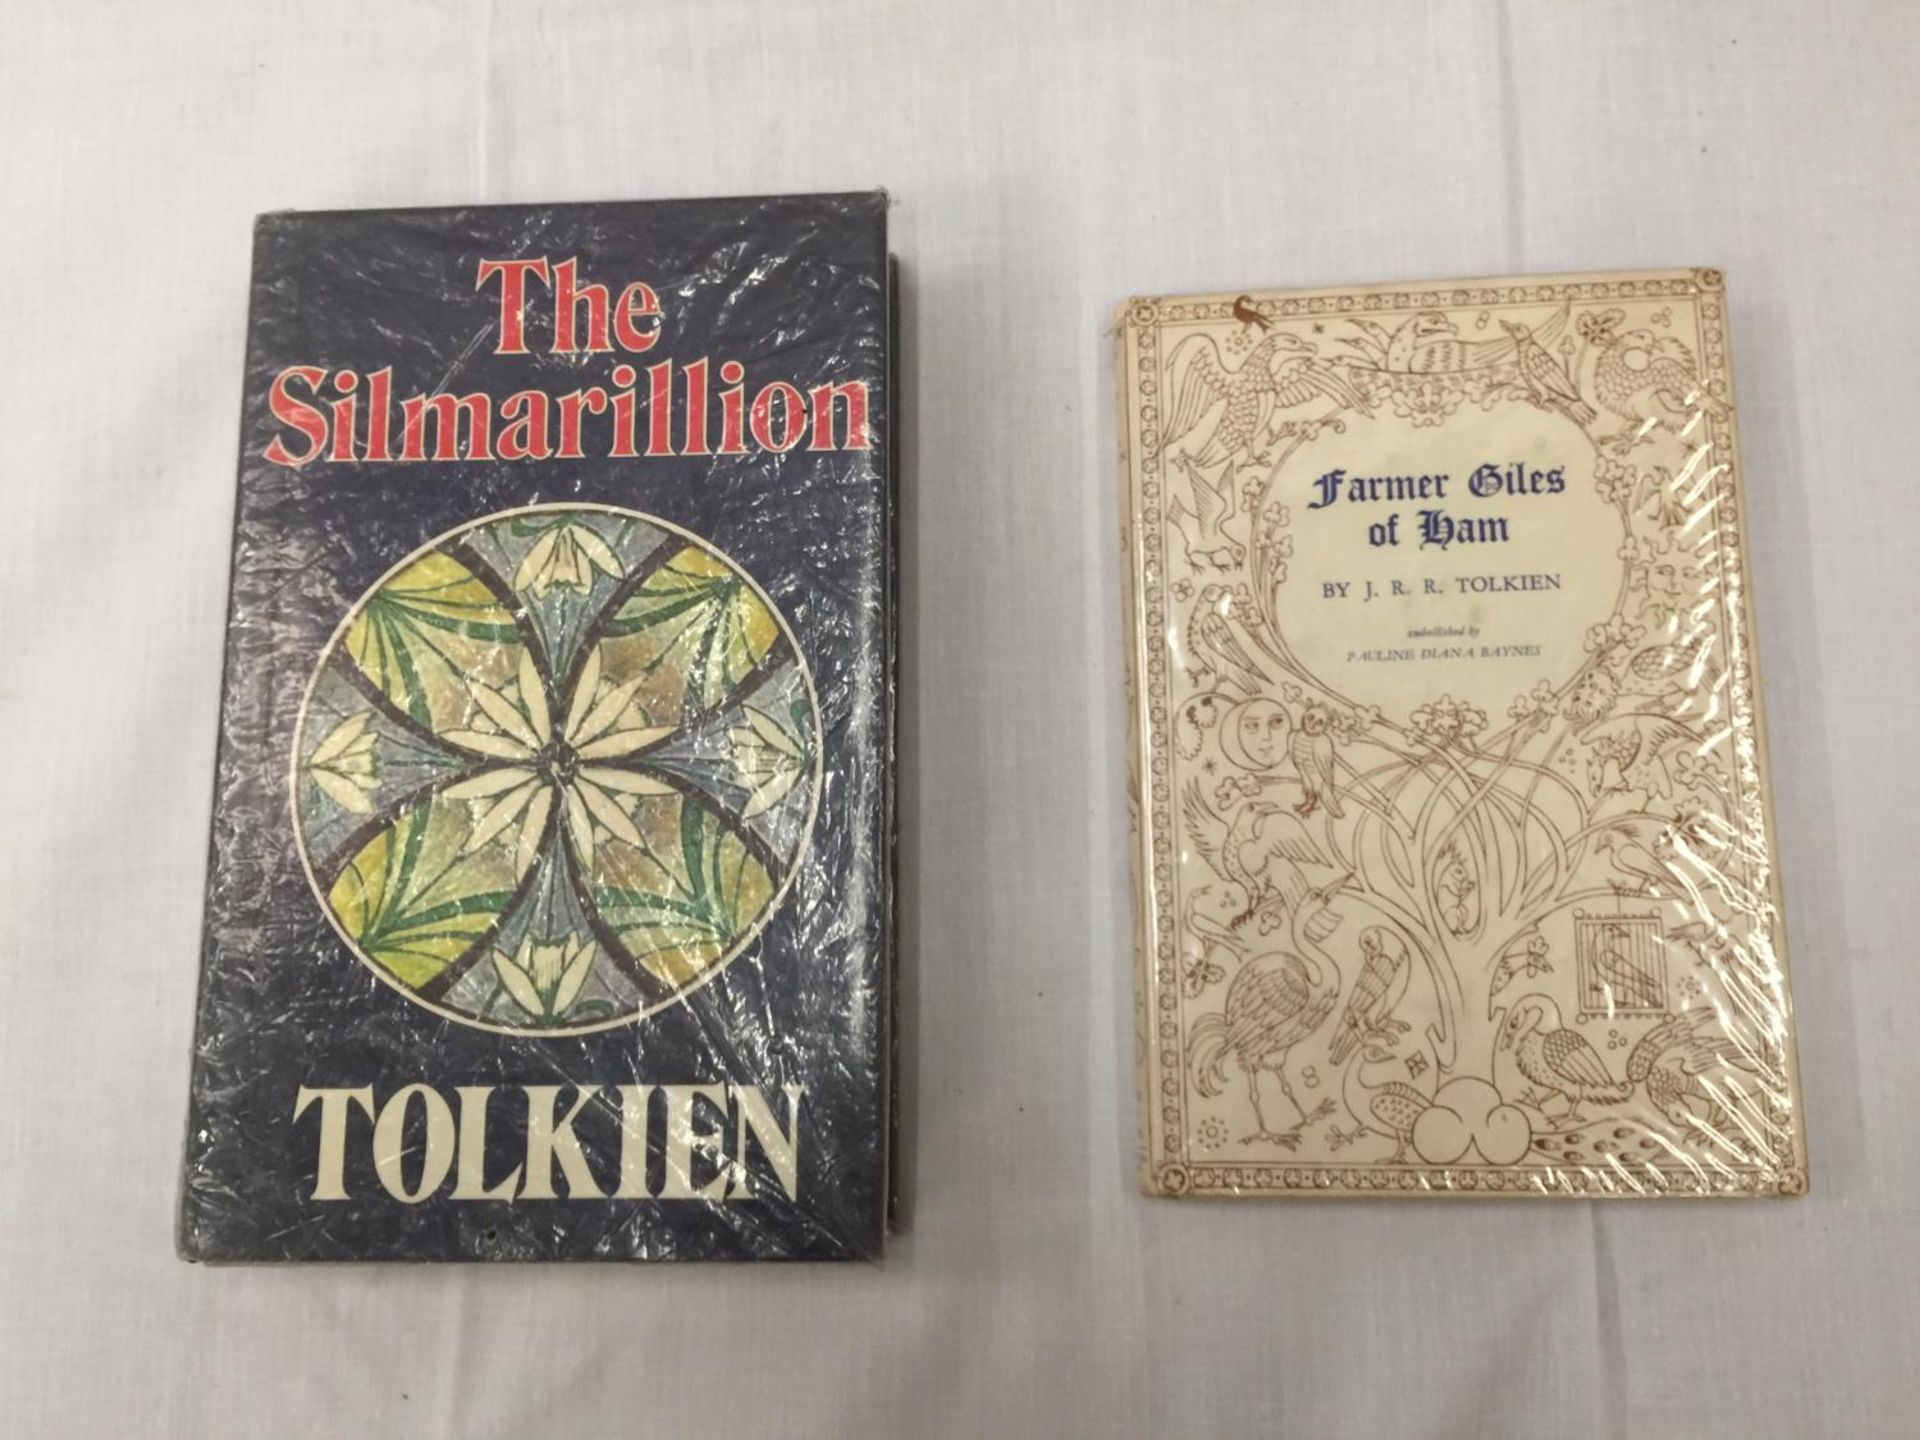 TWO BOOKS BY J.R.R. TOLKIEN, ONE BEING A FIRST EDITION 'THE SILMARILLION' HARDBACK WITH DUST COVER